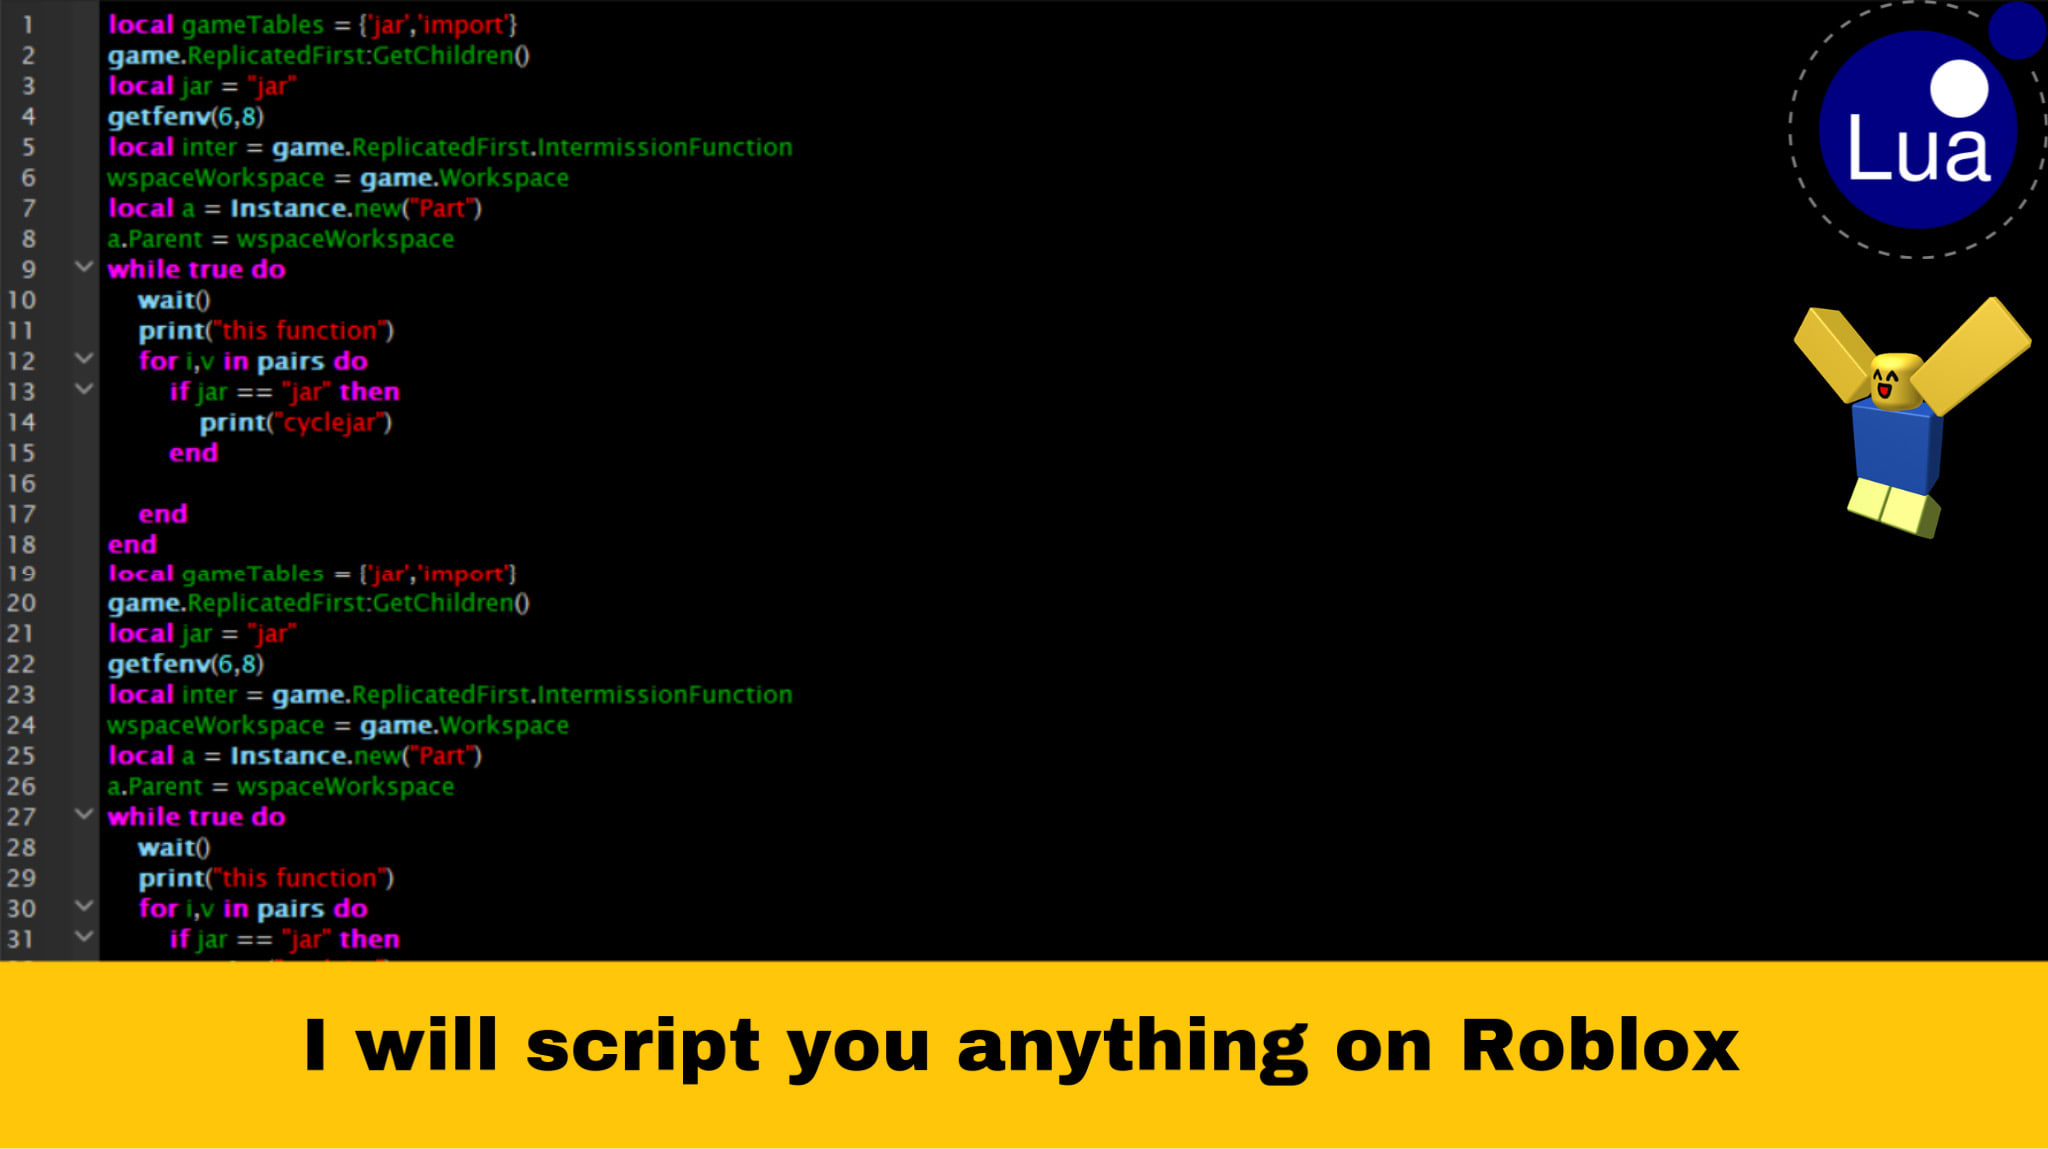 Make A Script Or A System For You On Roblox By Frepzter - roblox lua tables